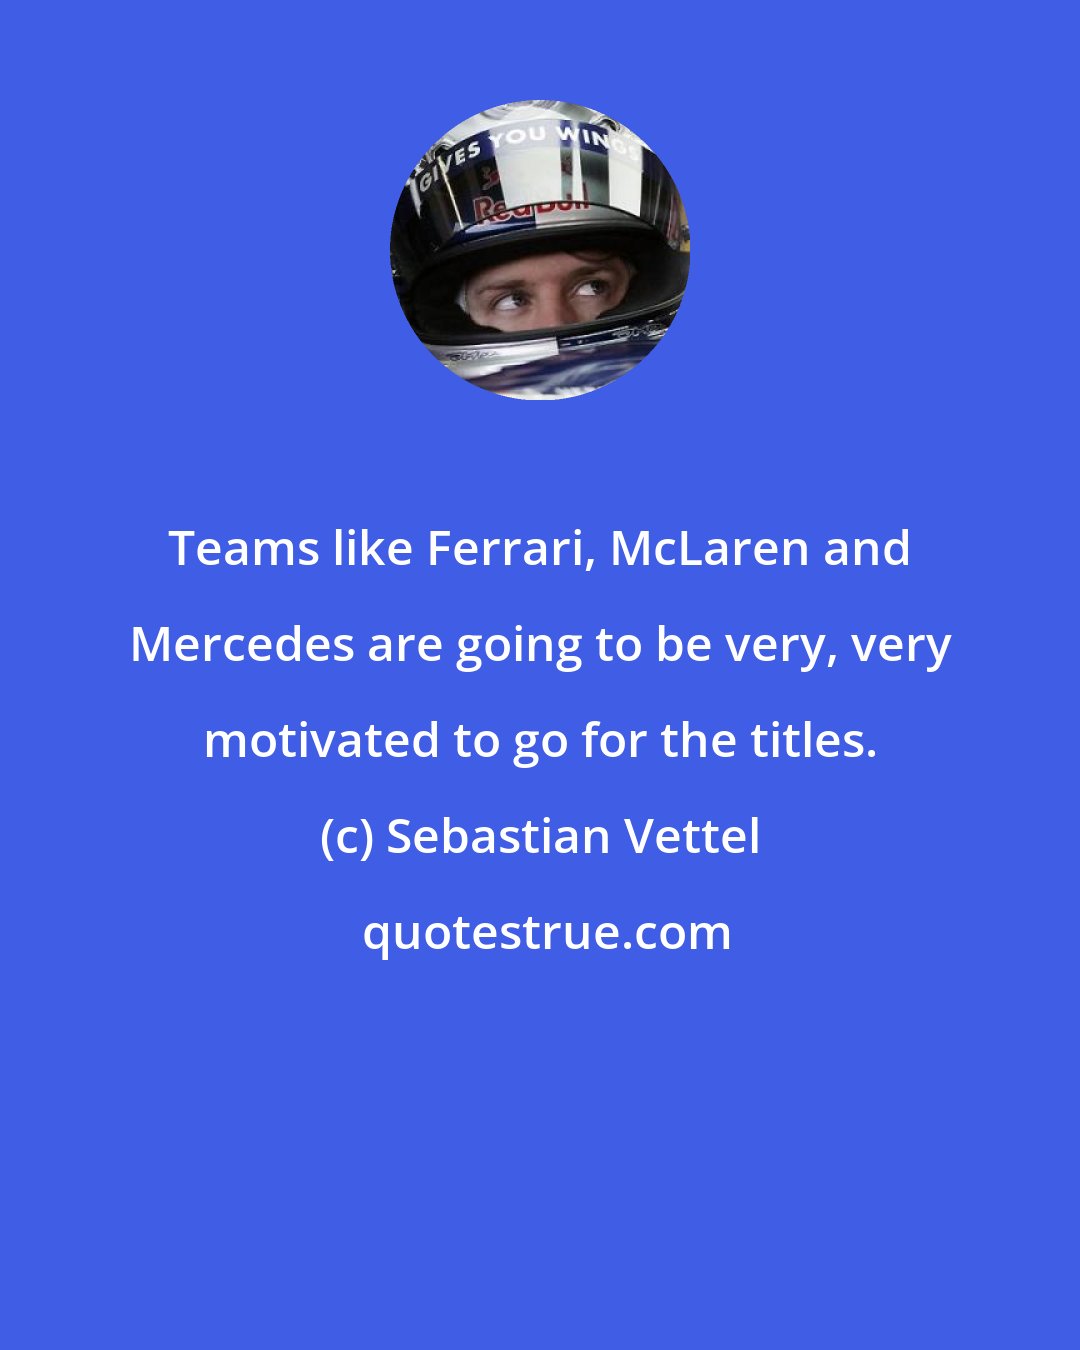 Sebastian Vettel: Teams like Ferrari, McLaren and Mercedes are going to be very, very motivated to go for the titles.